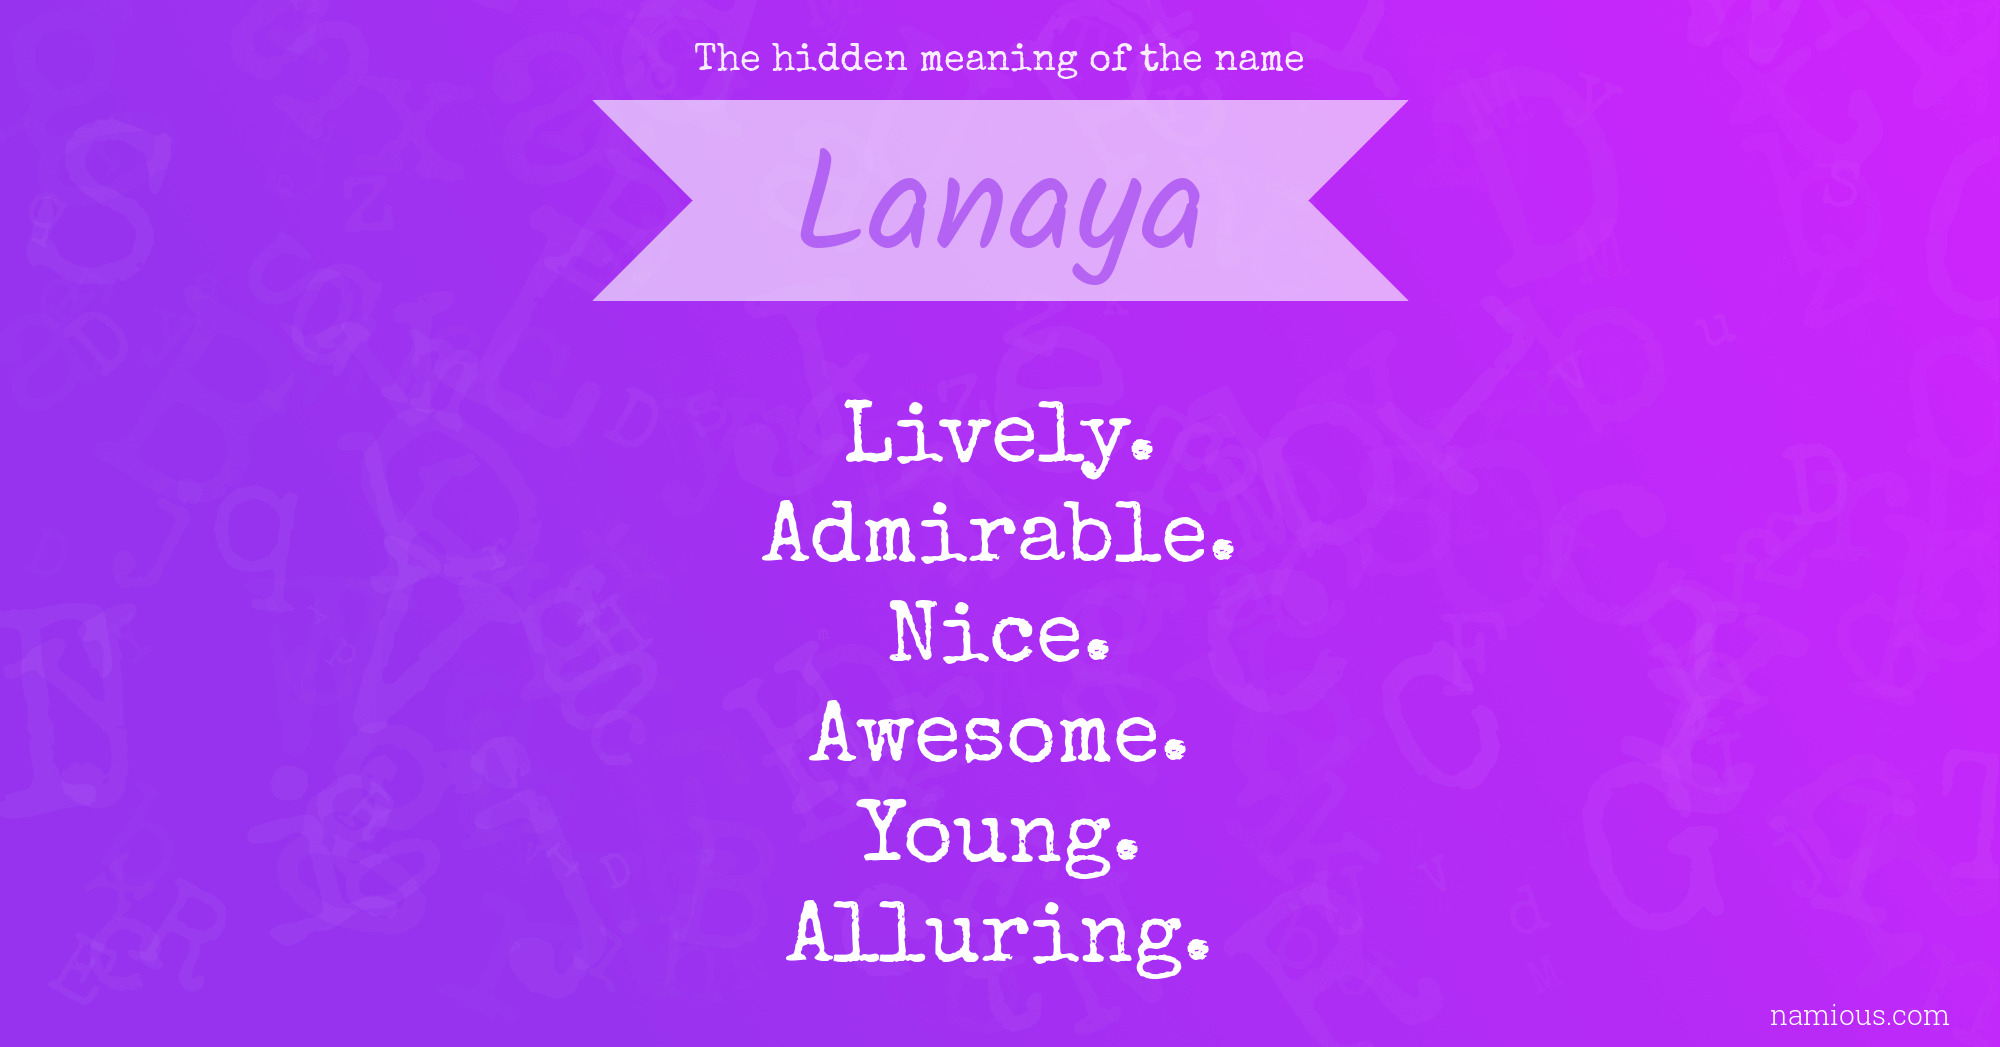 The hidden meaning of the name Lanaya